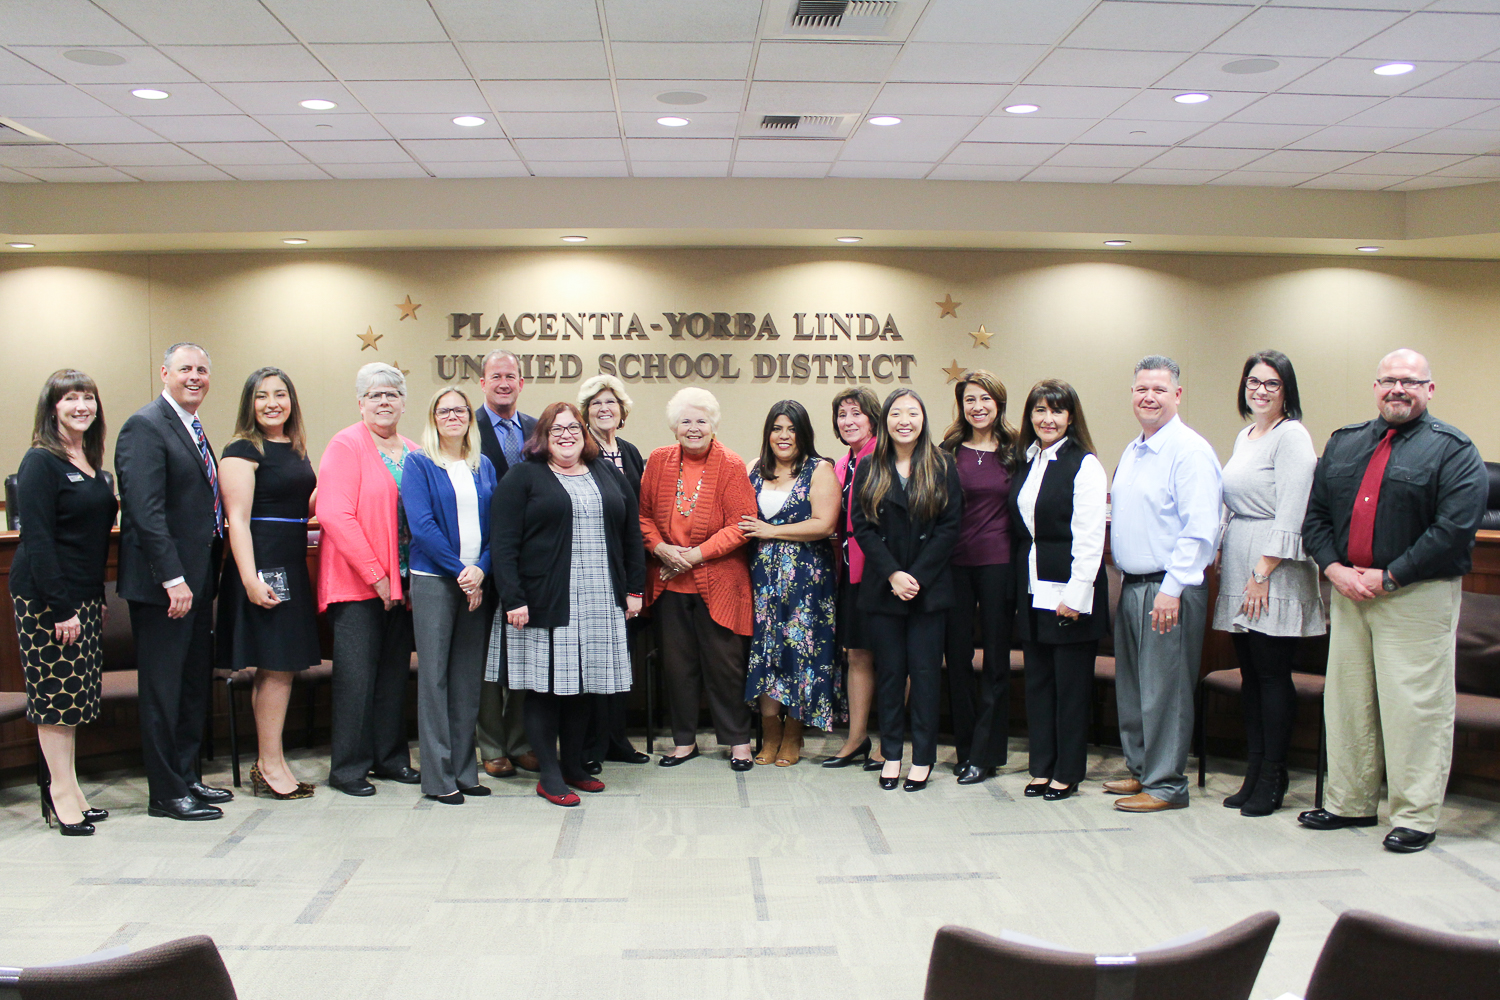 The 2019 Placentia-Yorba Linda Unified School District Employees of the Year pictured with the Board of Education, Executive Cabinet, APLE & CSEA Presidents, and a representative from SchoolsFirst FCU on March 5, 2019.